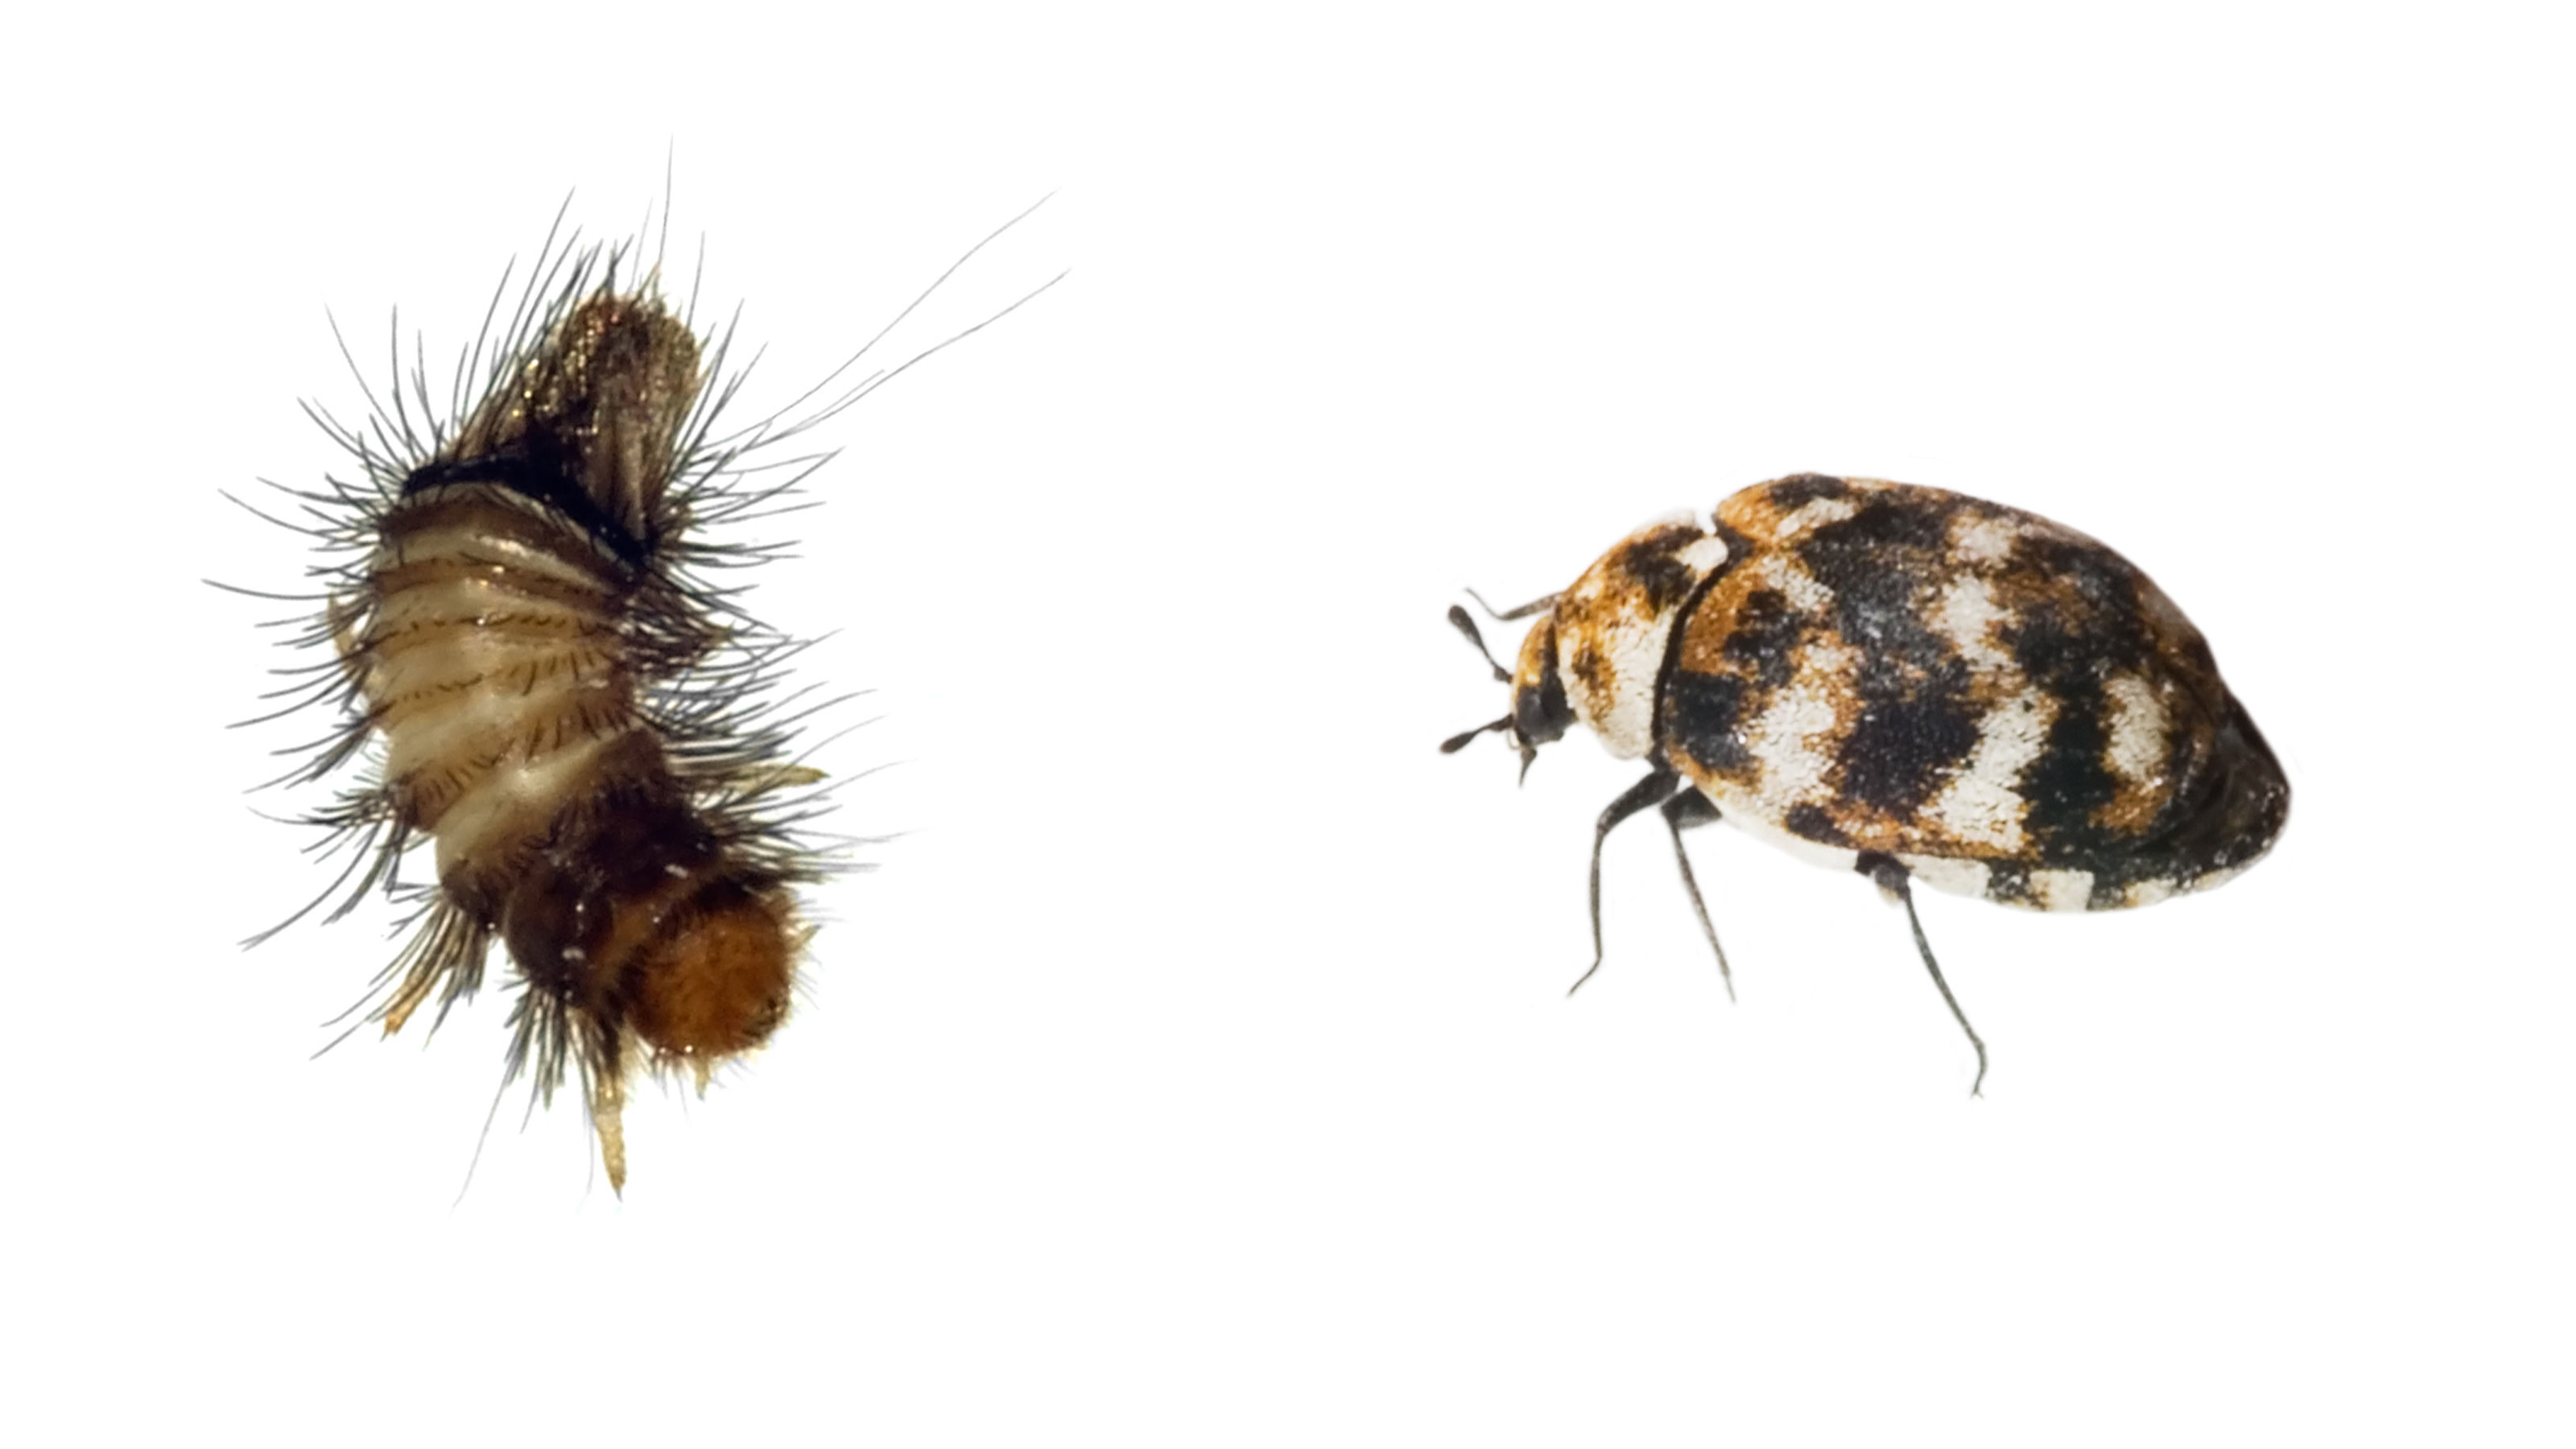 How to get rid of carpet beetle larvae, according to pest pros